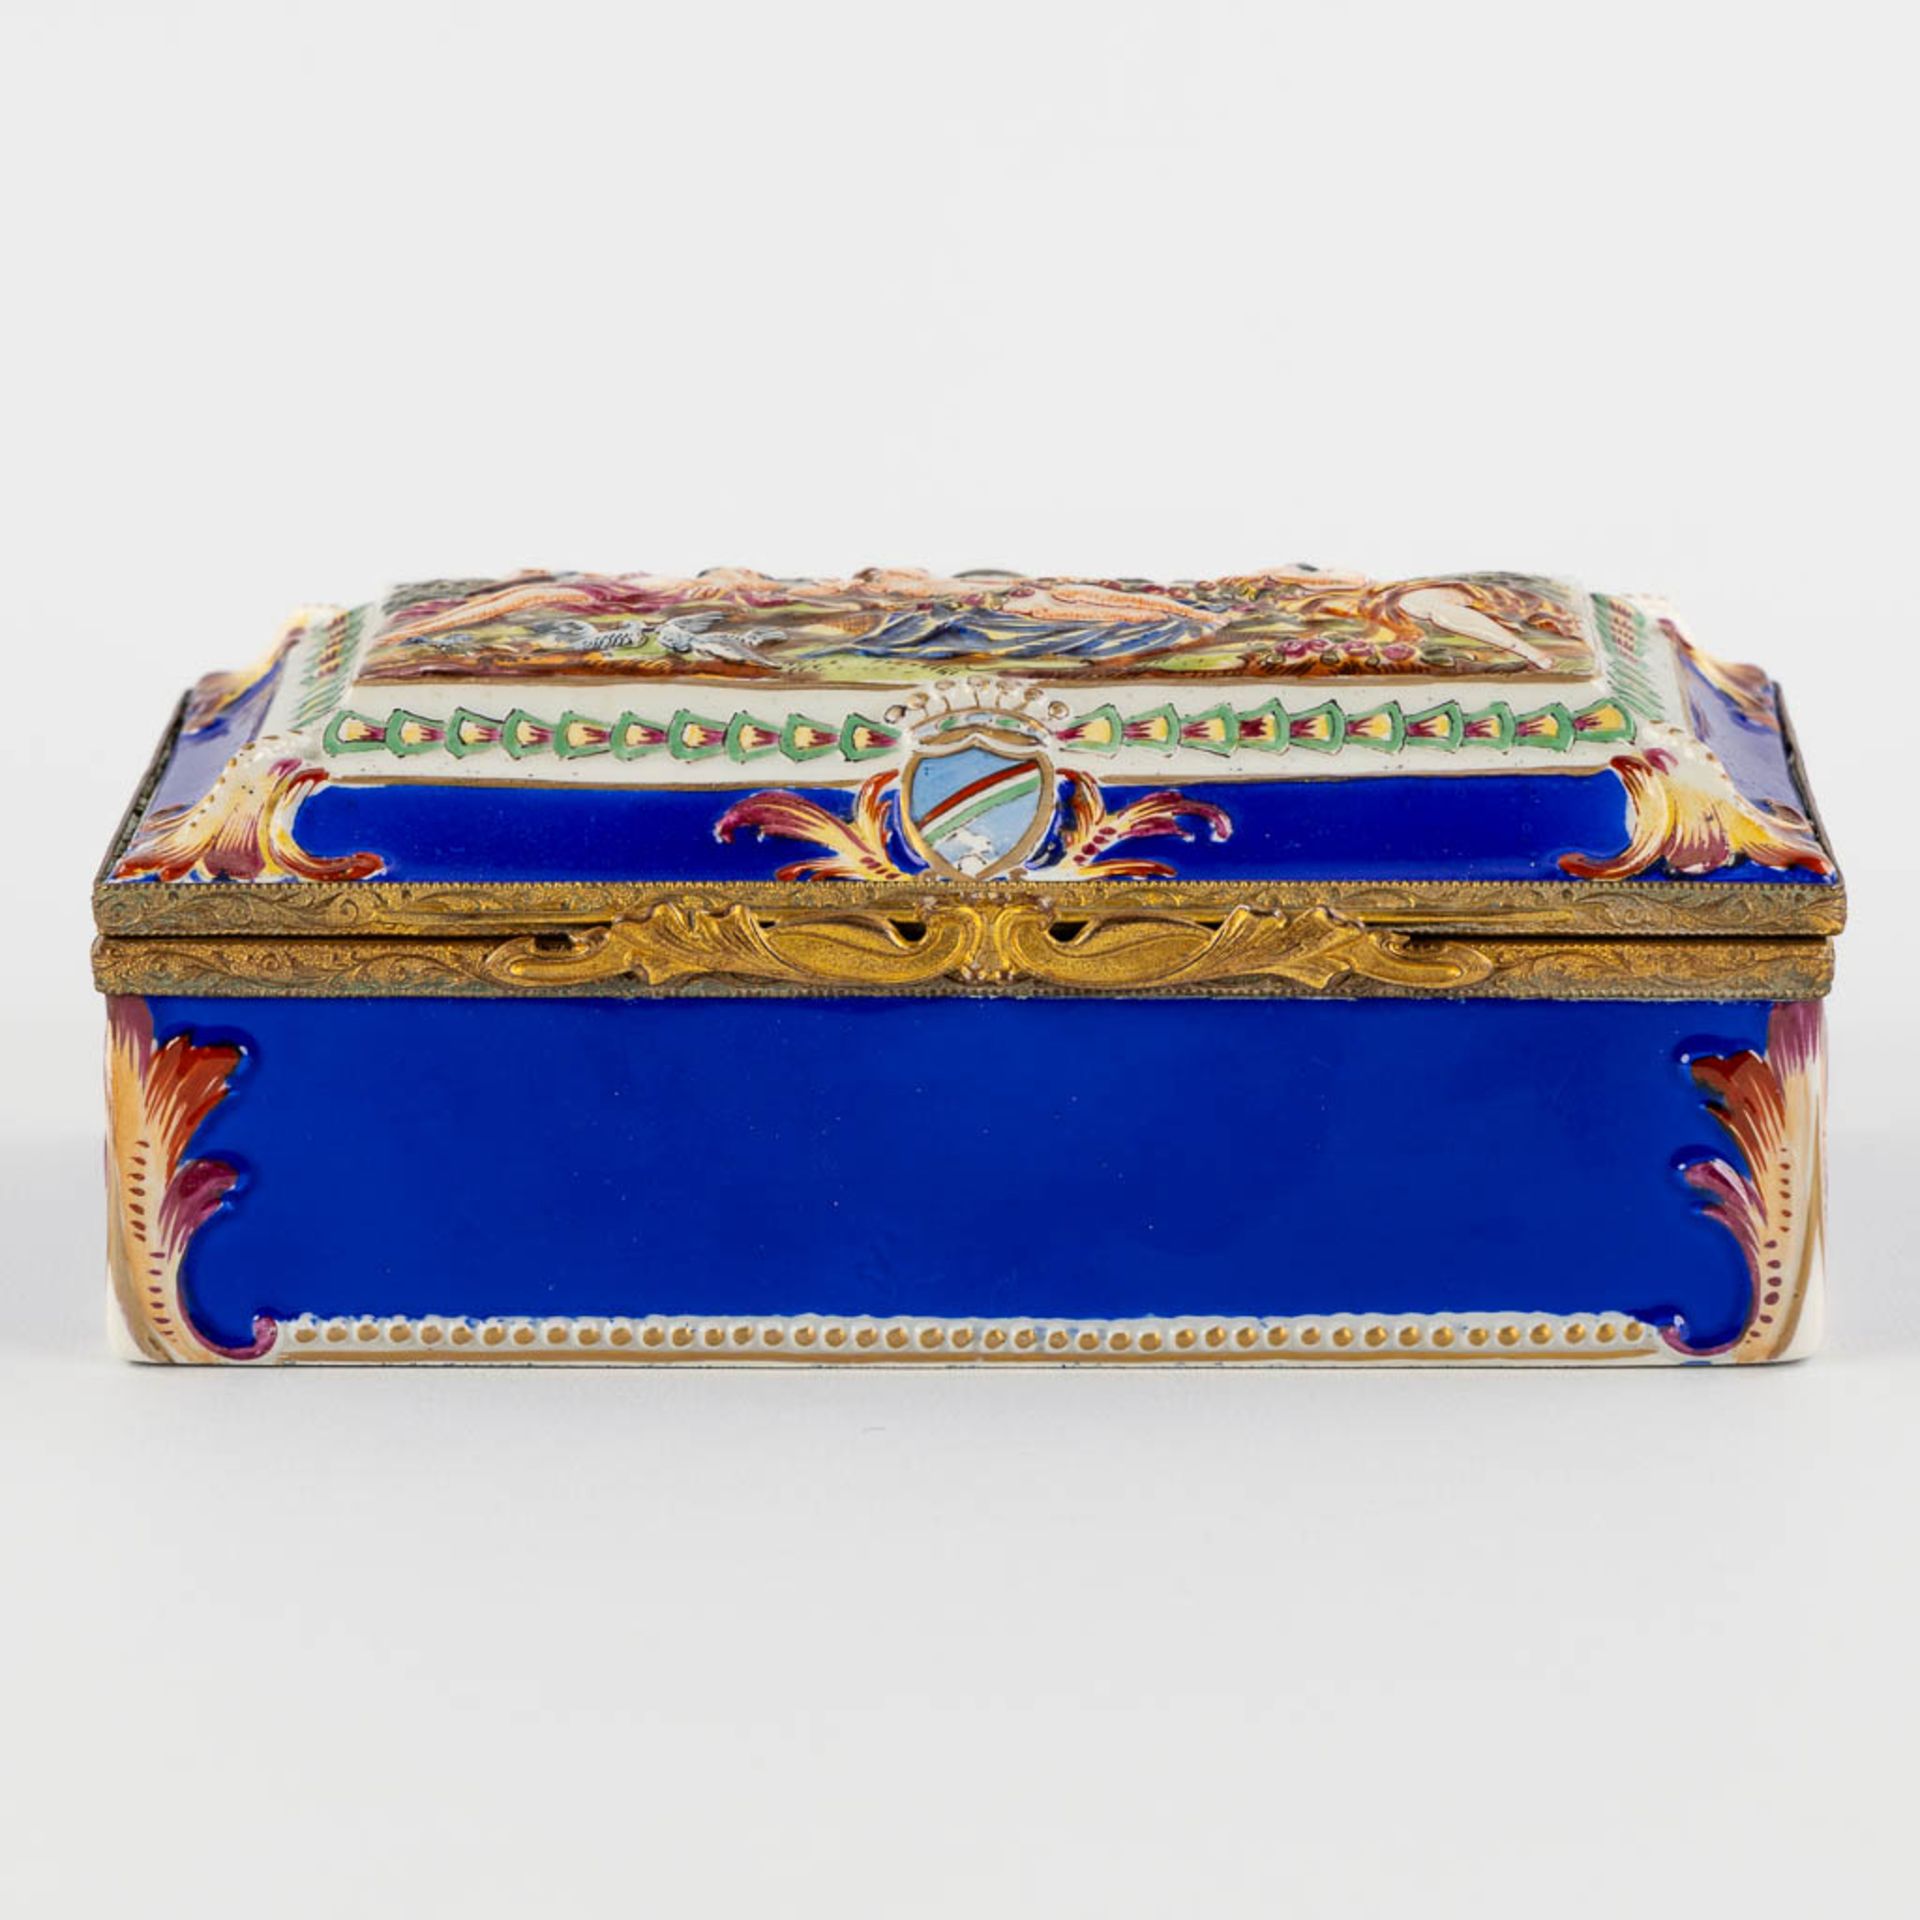 Capodimonte, a finely made porcelain jewellery box. 19th C. (L:10 x W:19 x H:7 cm) - Image 4 of 12